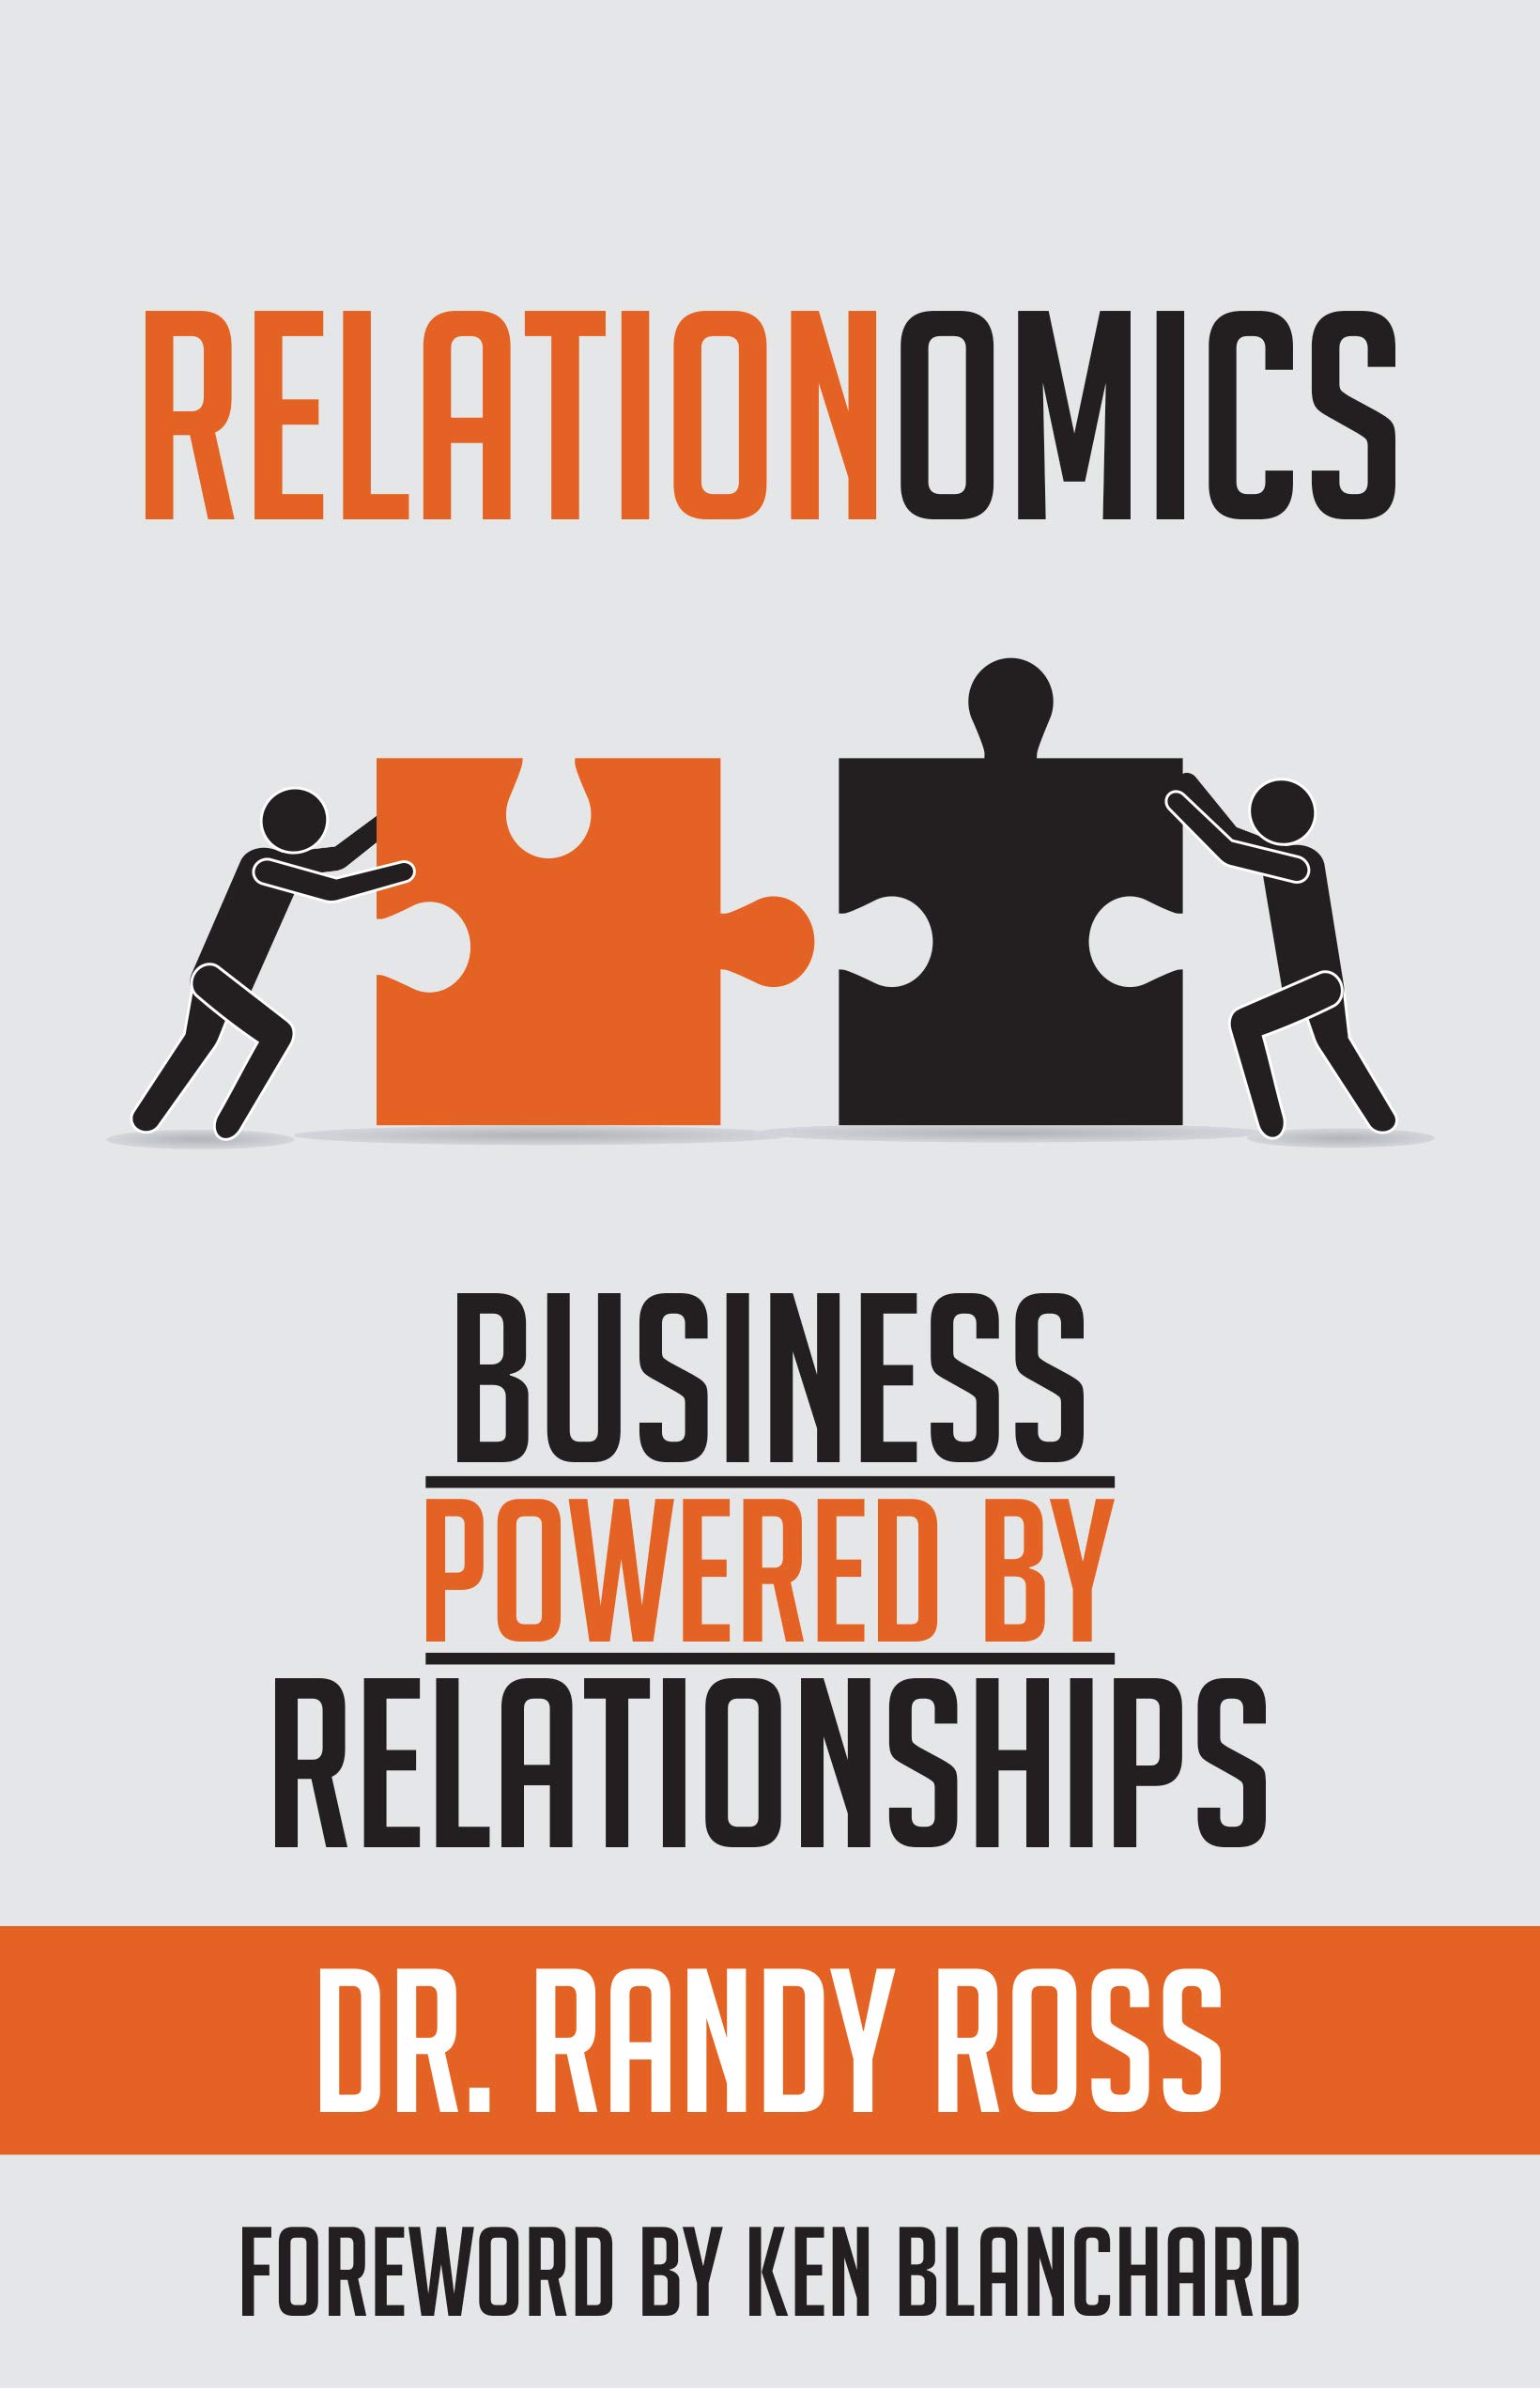 Relationomics:Business Powered By Relationships